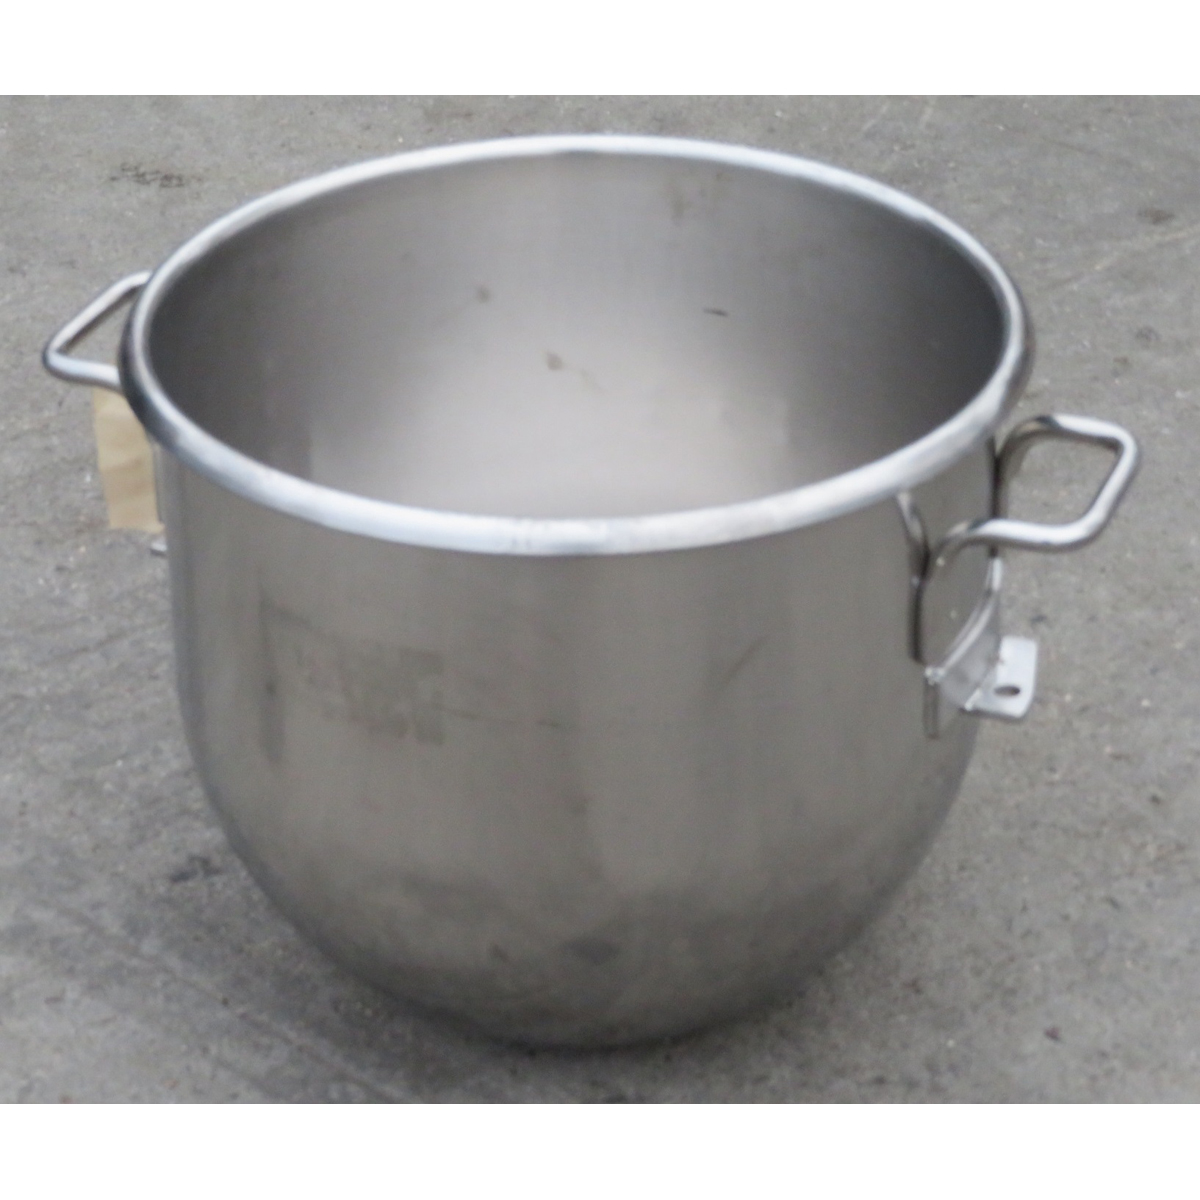 Hobart 00-275686 VMLHP40 80-40 Stainless Steel Mixer Bowl, Used Excellent Condition image 1